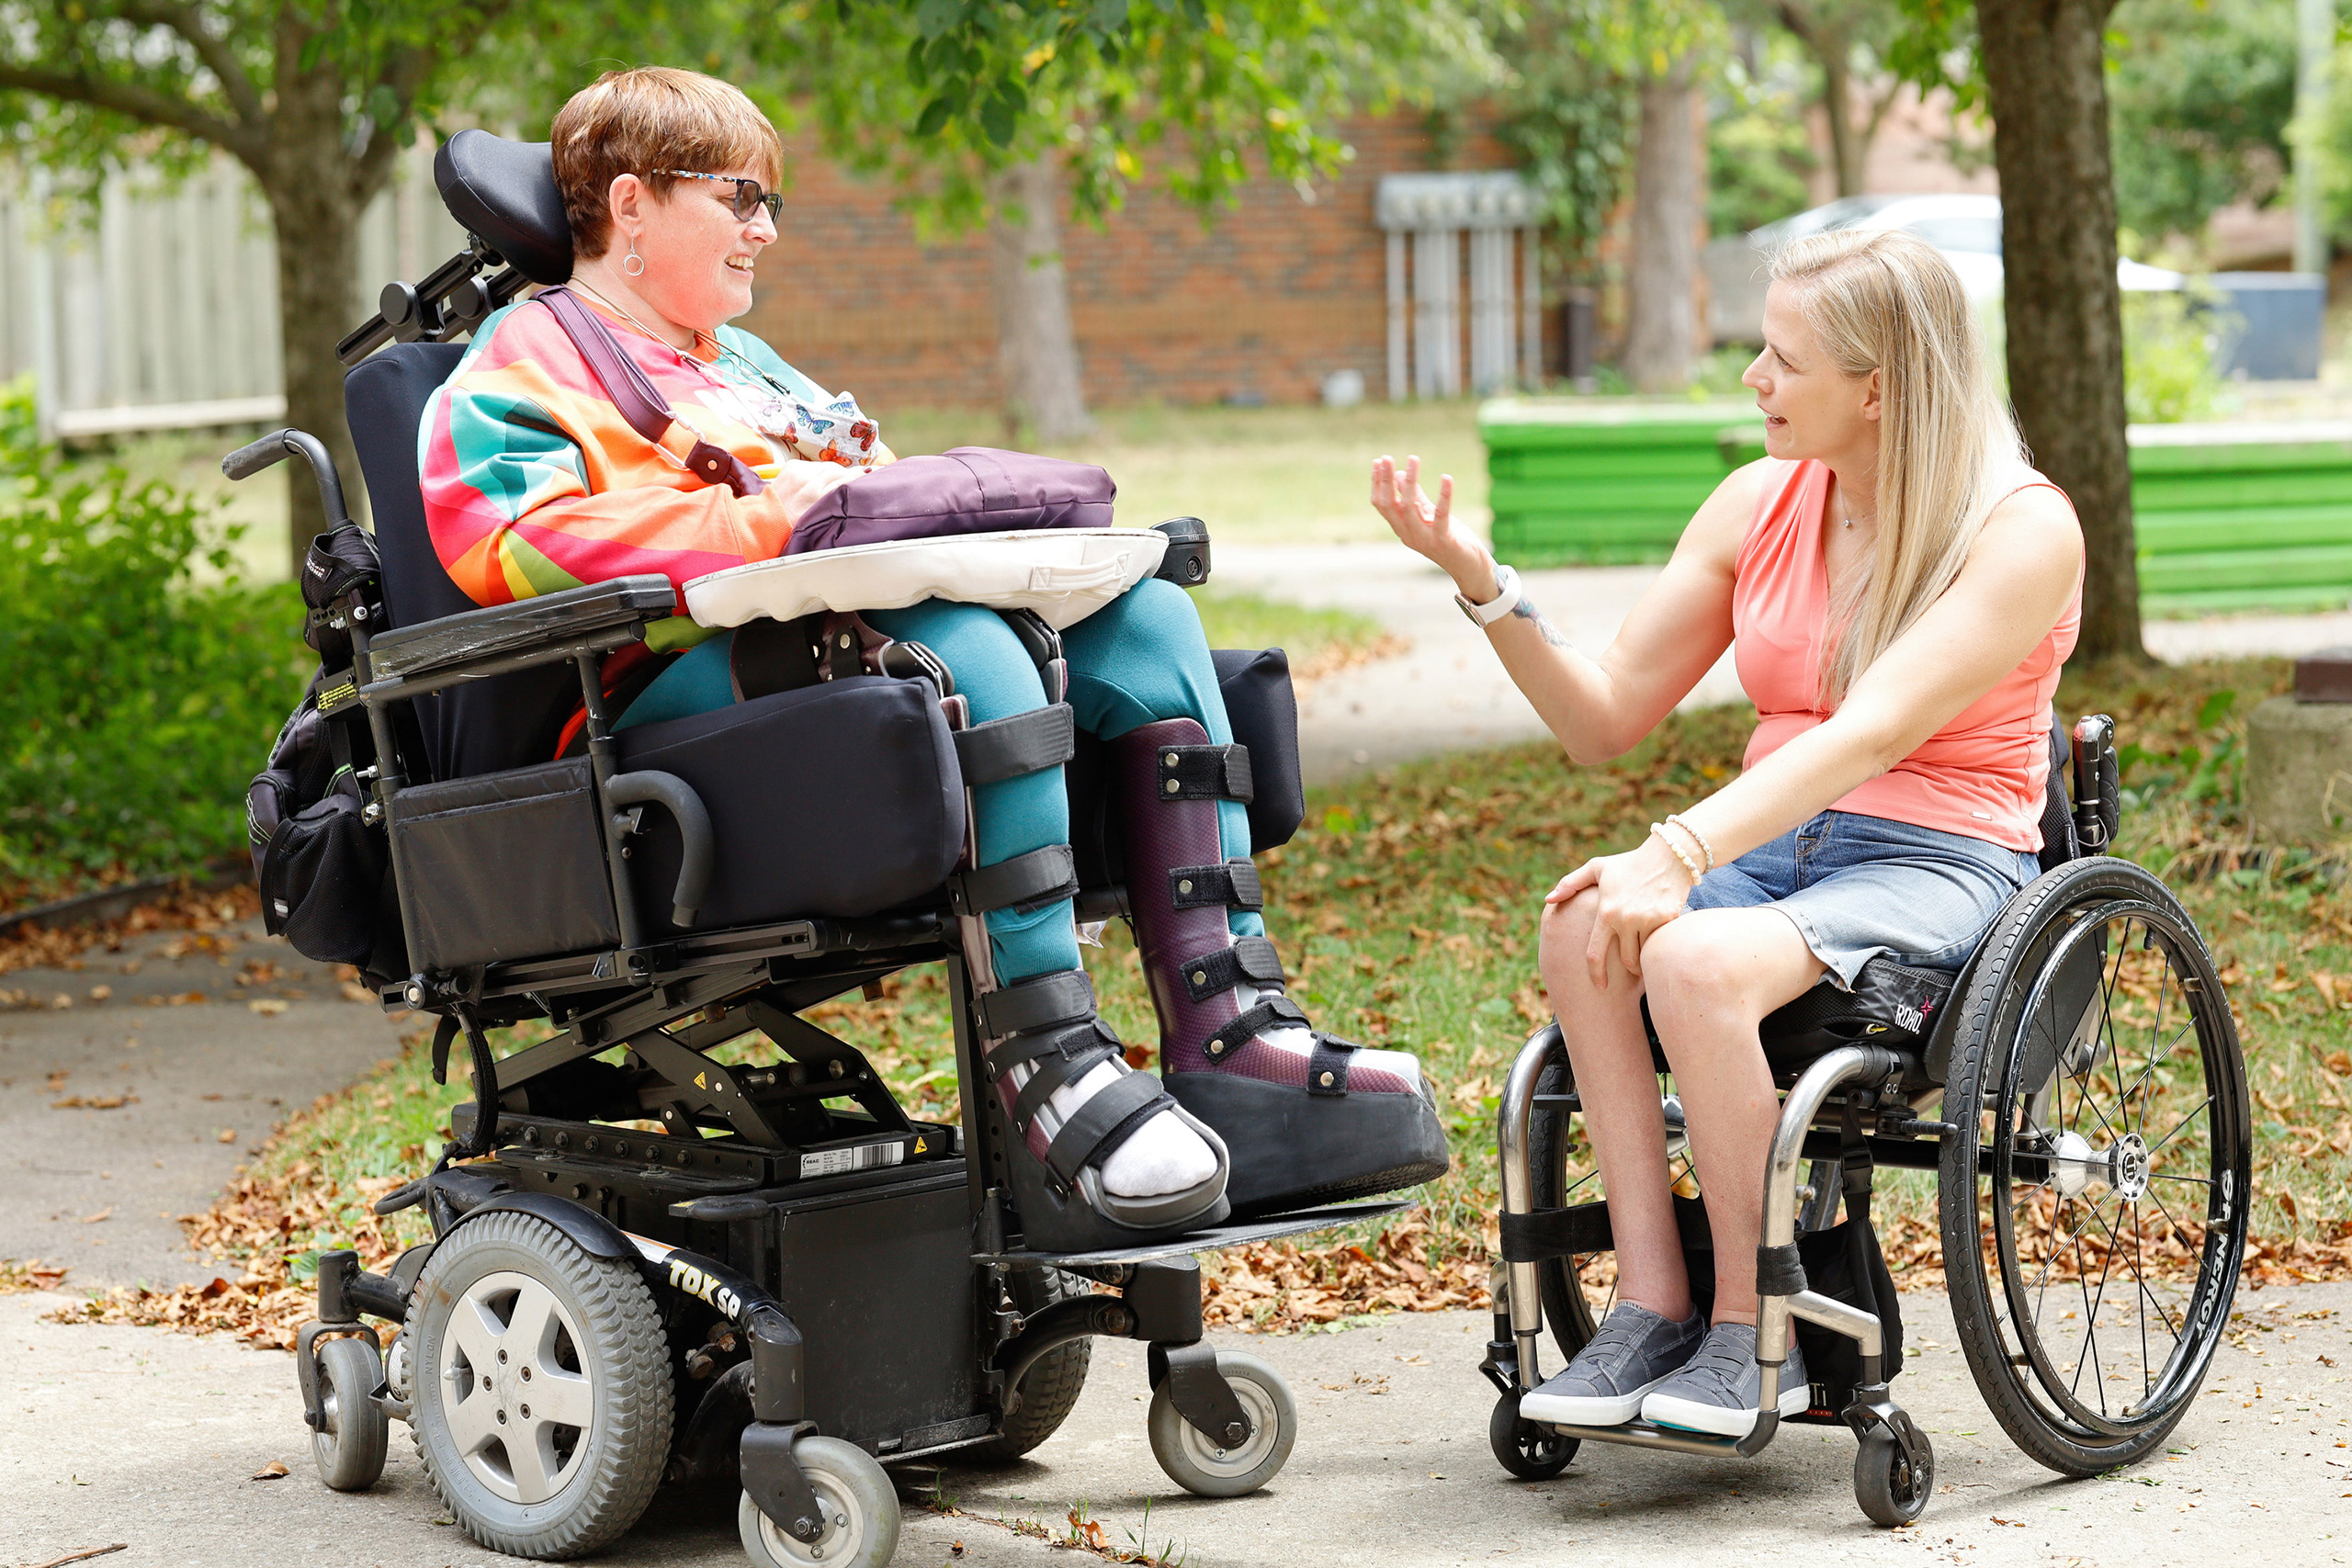 two women in wheelchairs having a chat outdoors